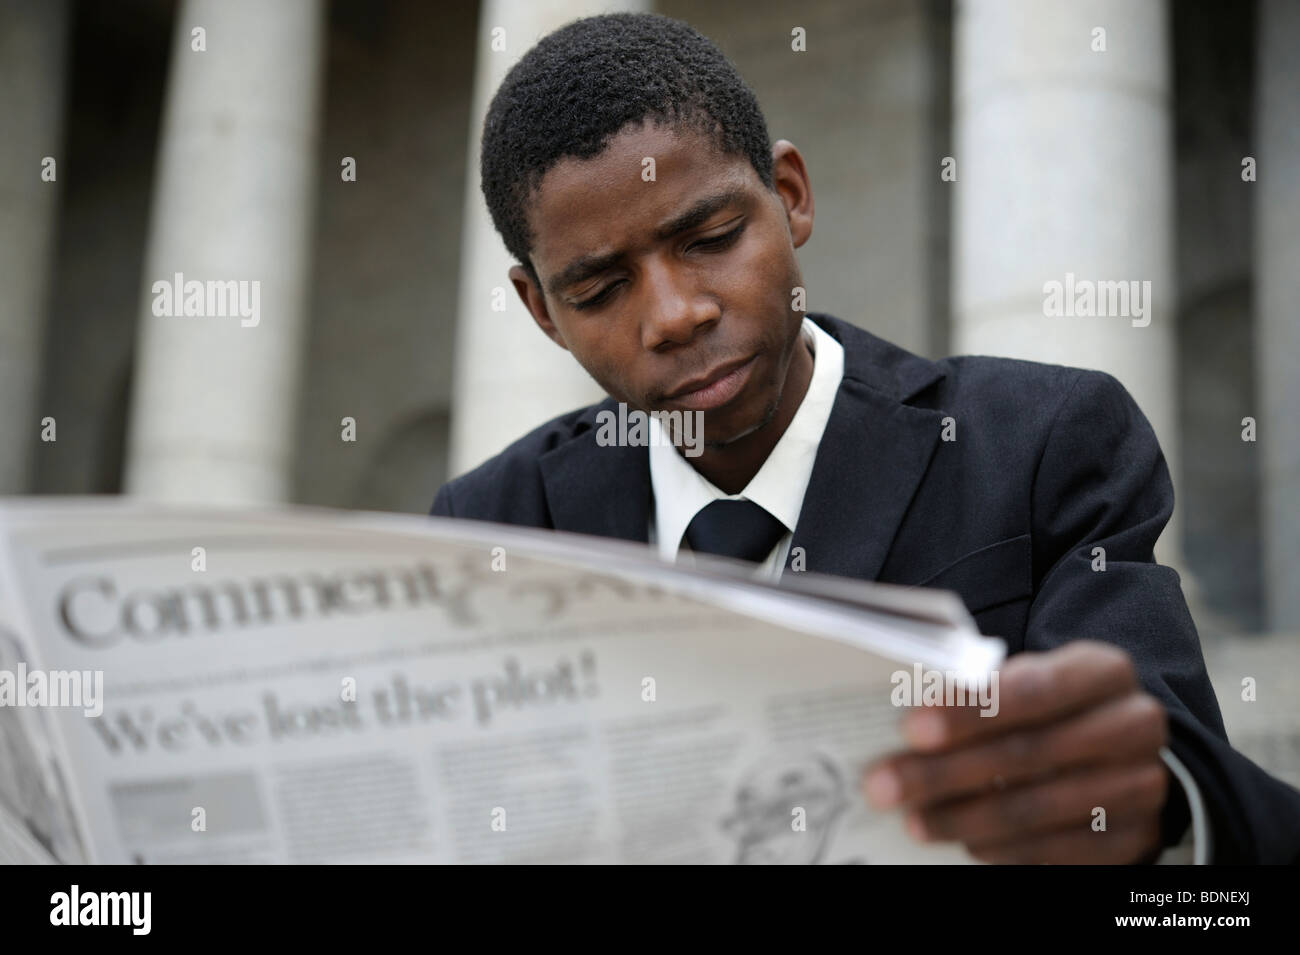 Portrait of young business man reading newspaper, Cape Town, Western Cape Province, South Africa Stock Photo